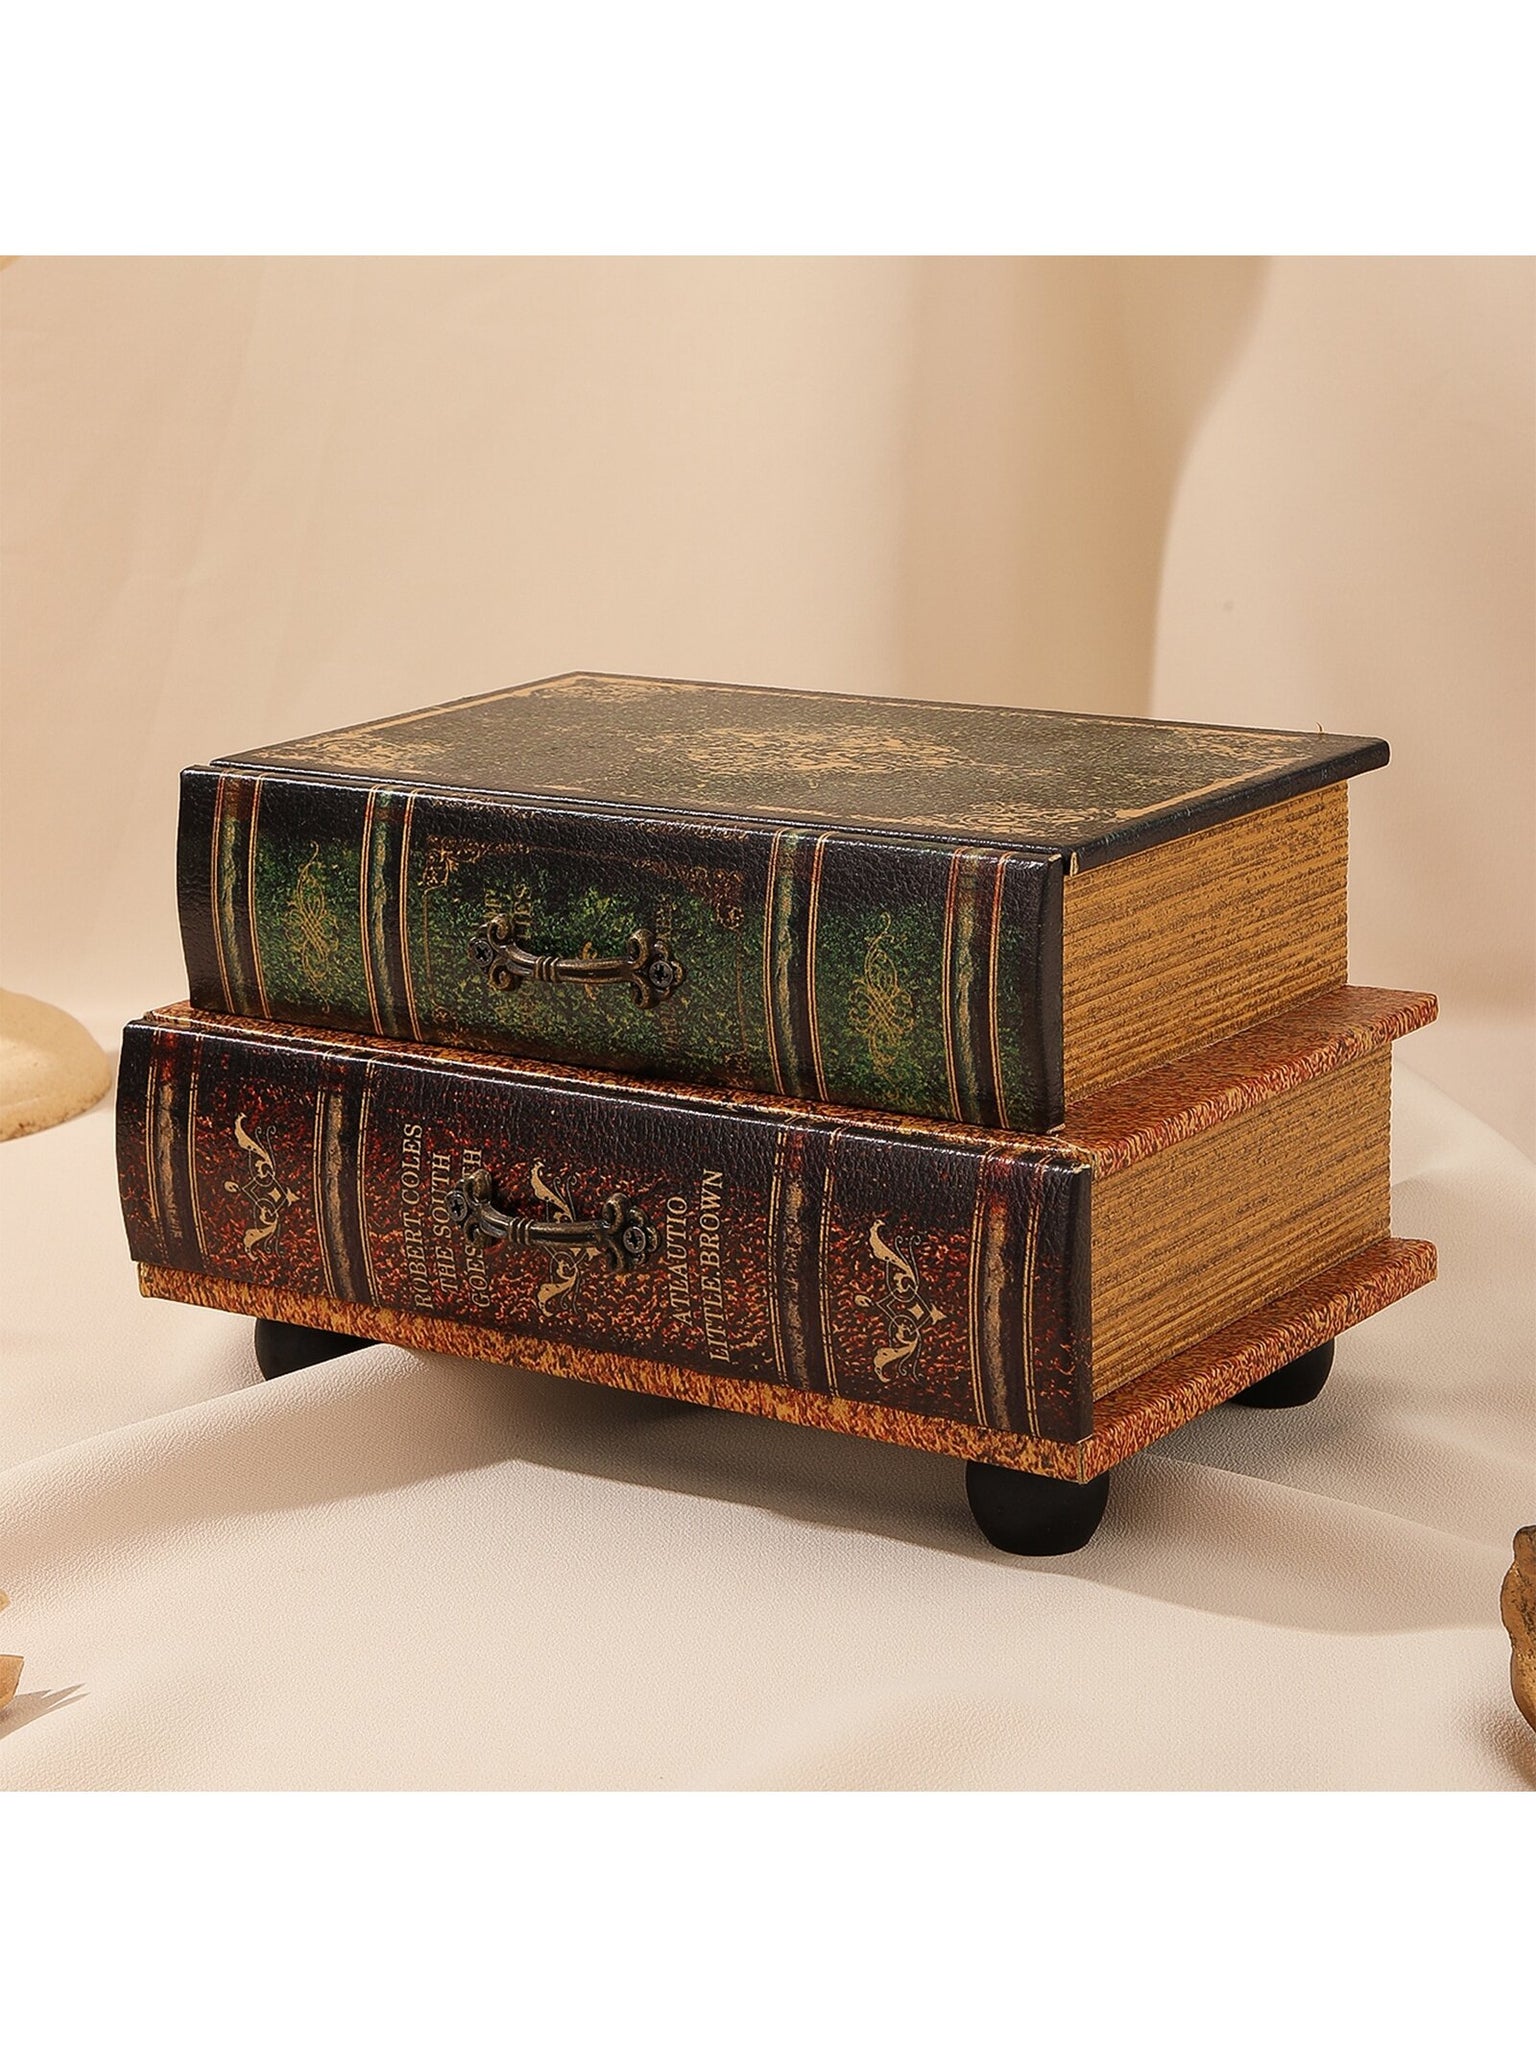 1pc Two Stack Book Shaped Pu Wood Jewelry Box With Drawers And Base Stand, Vintage Classic Book Style, American Style Decor For Home Office Storage Organizer